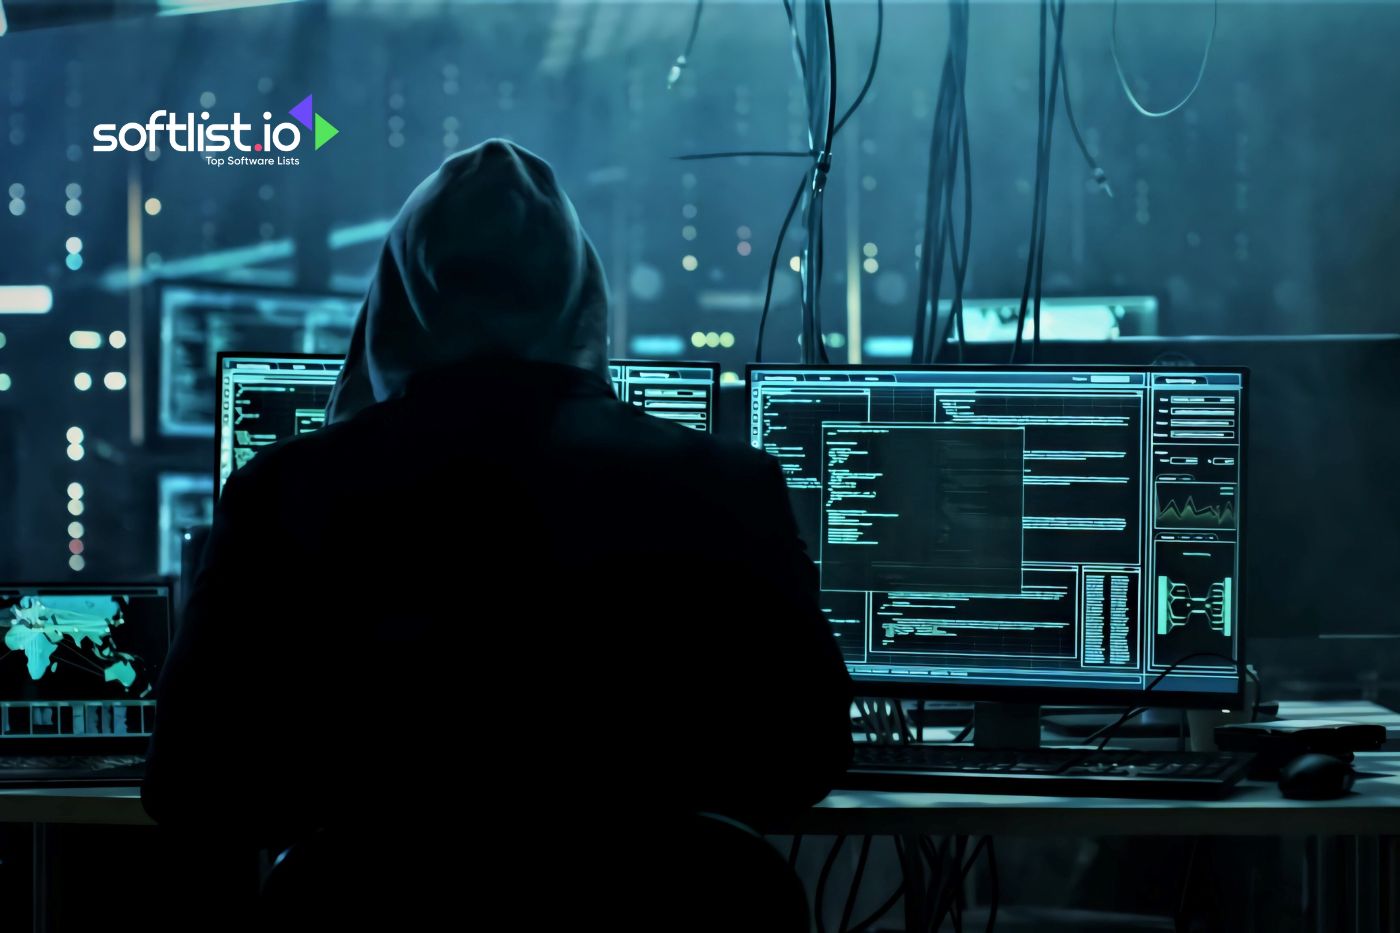 Hacker silhouette with multiple computer screens